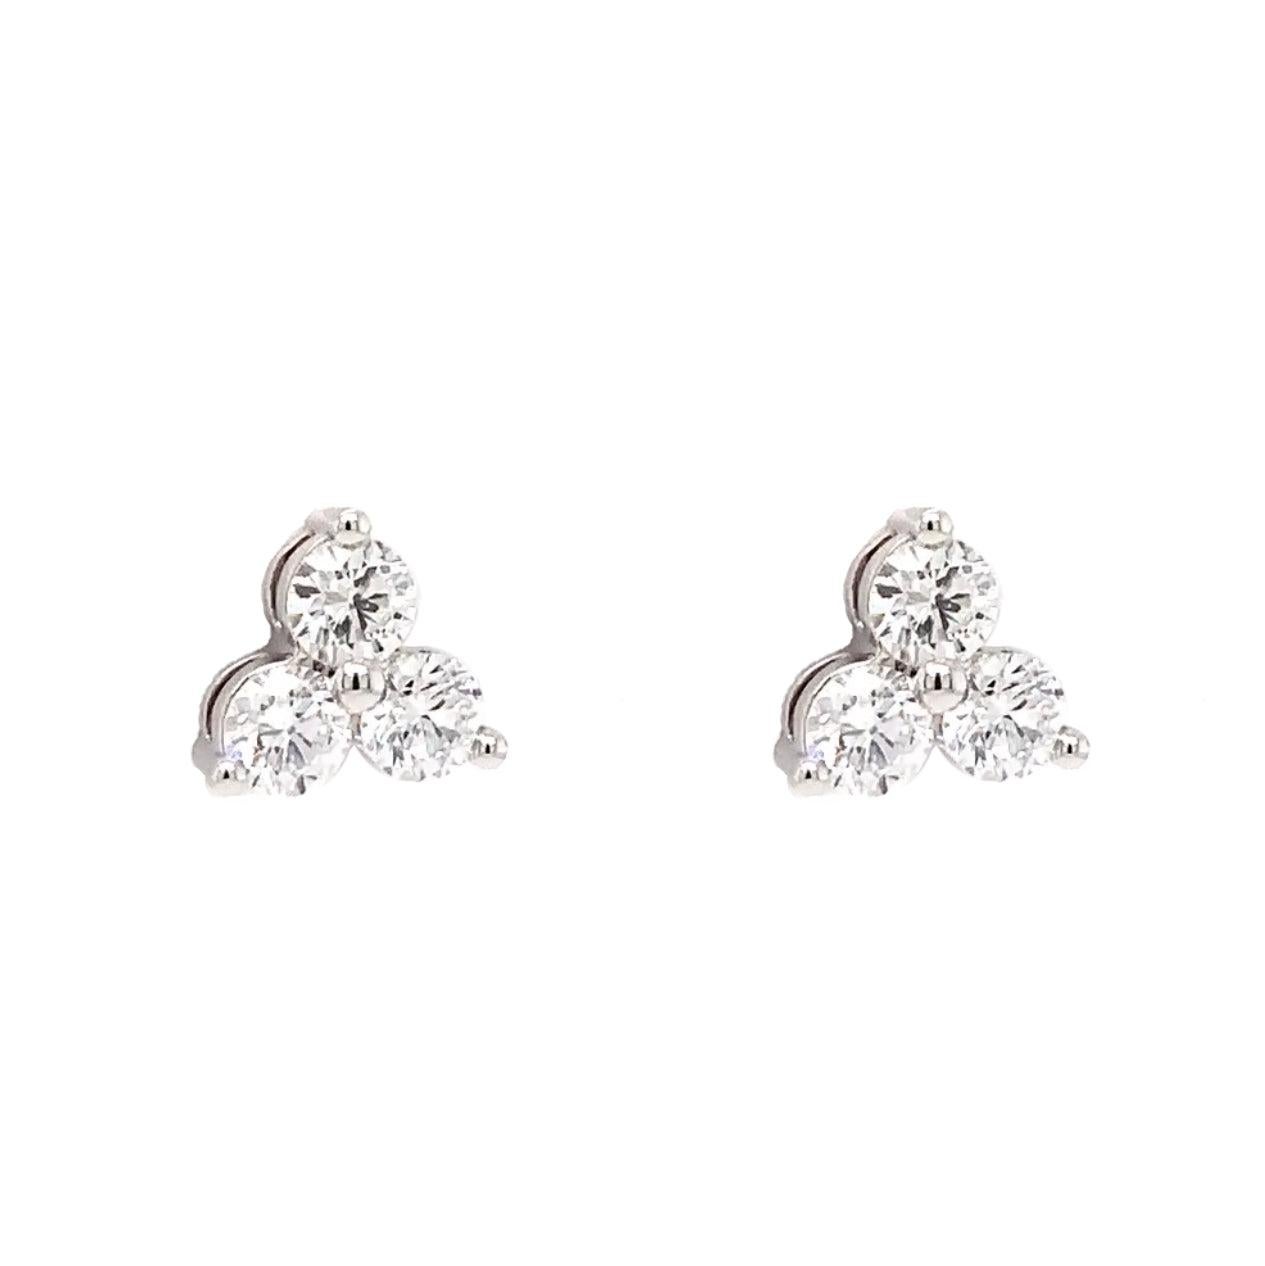 Memoire Trinity Collection 3 Stone Diamond Studs 0.91 ctw 18K White Gold

Additional Information:
Trinity Diamond Collection
6 Round Brilliant Diamonds equals 0.91 ctw
F Color
VS1 Clarity
This Earring measures 7.30 mm